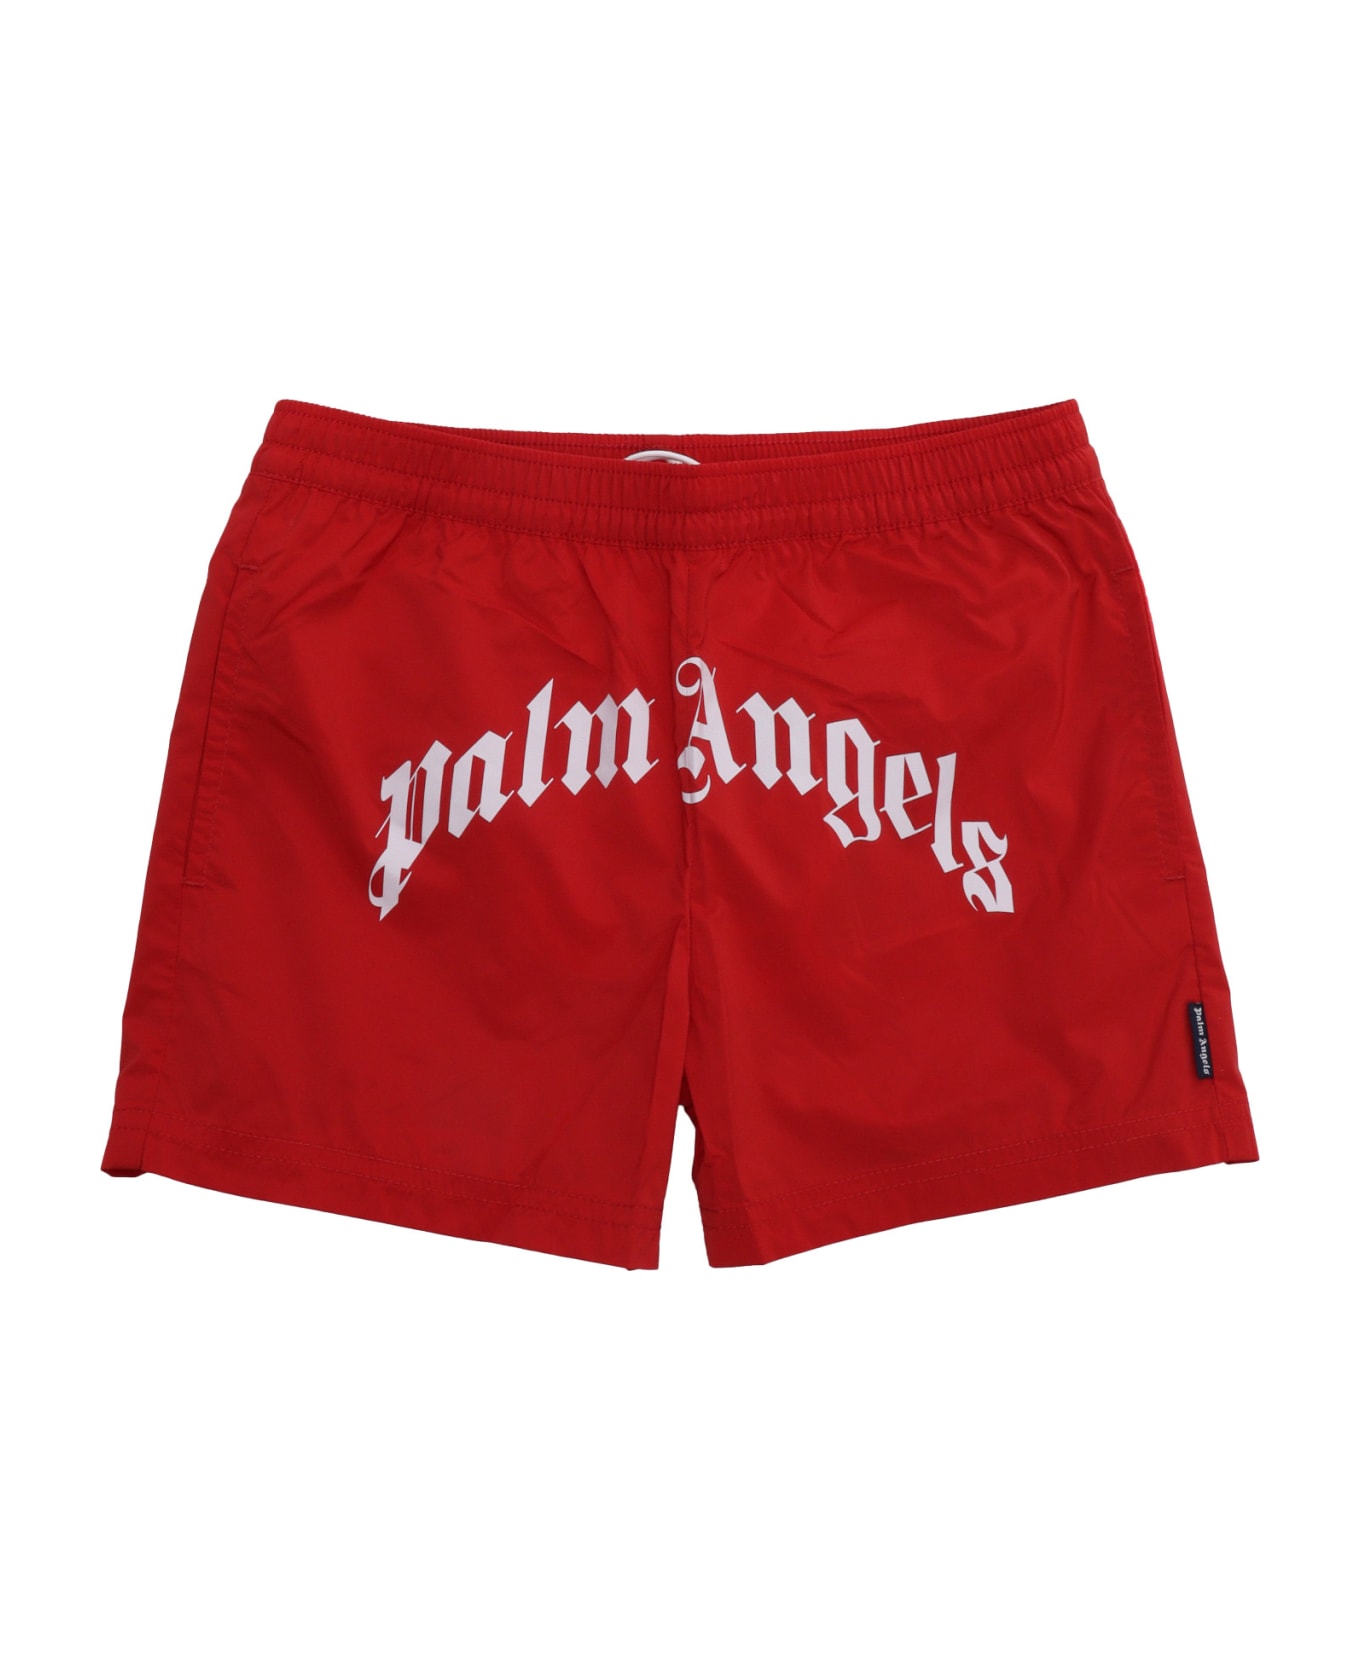 Palm Angels Curved Logo Swim Trunks - RED